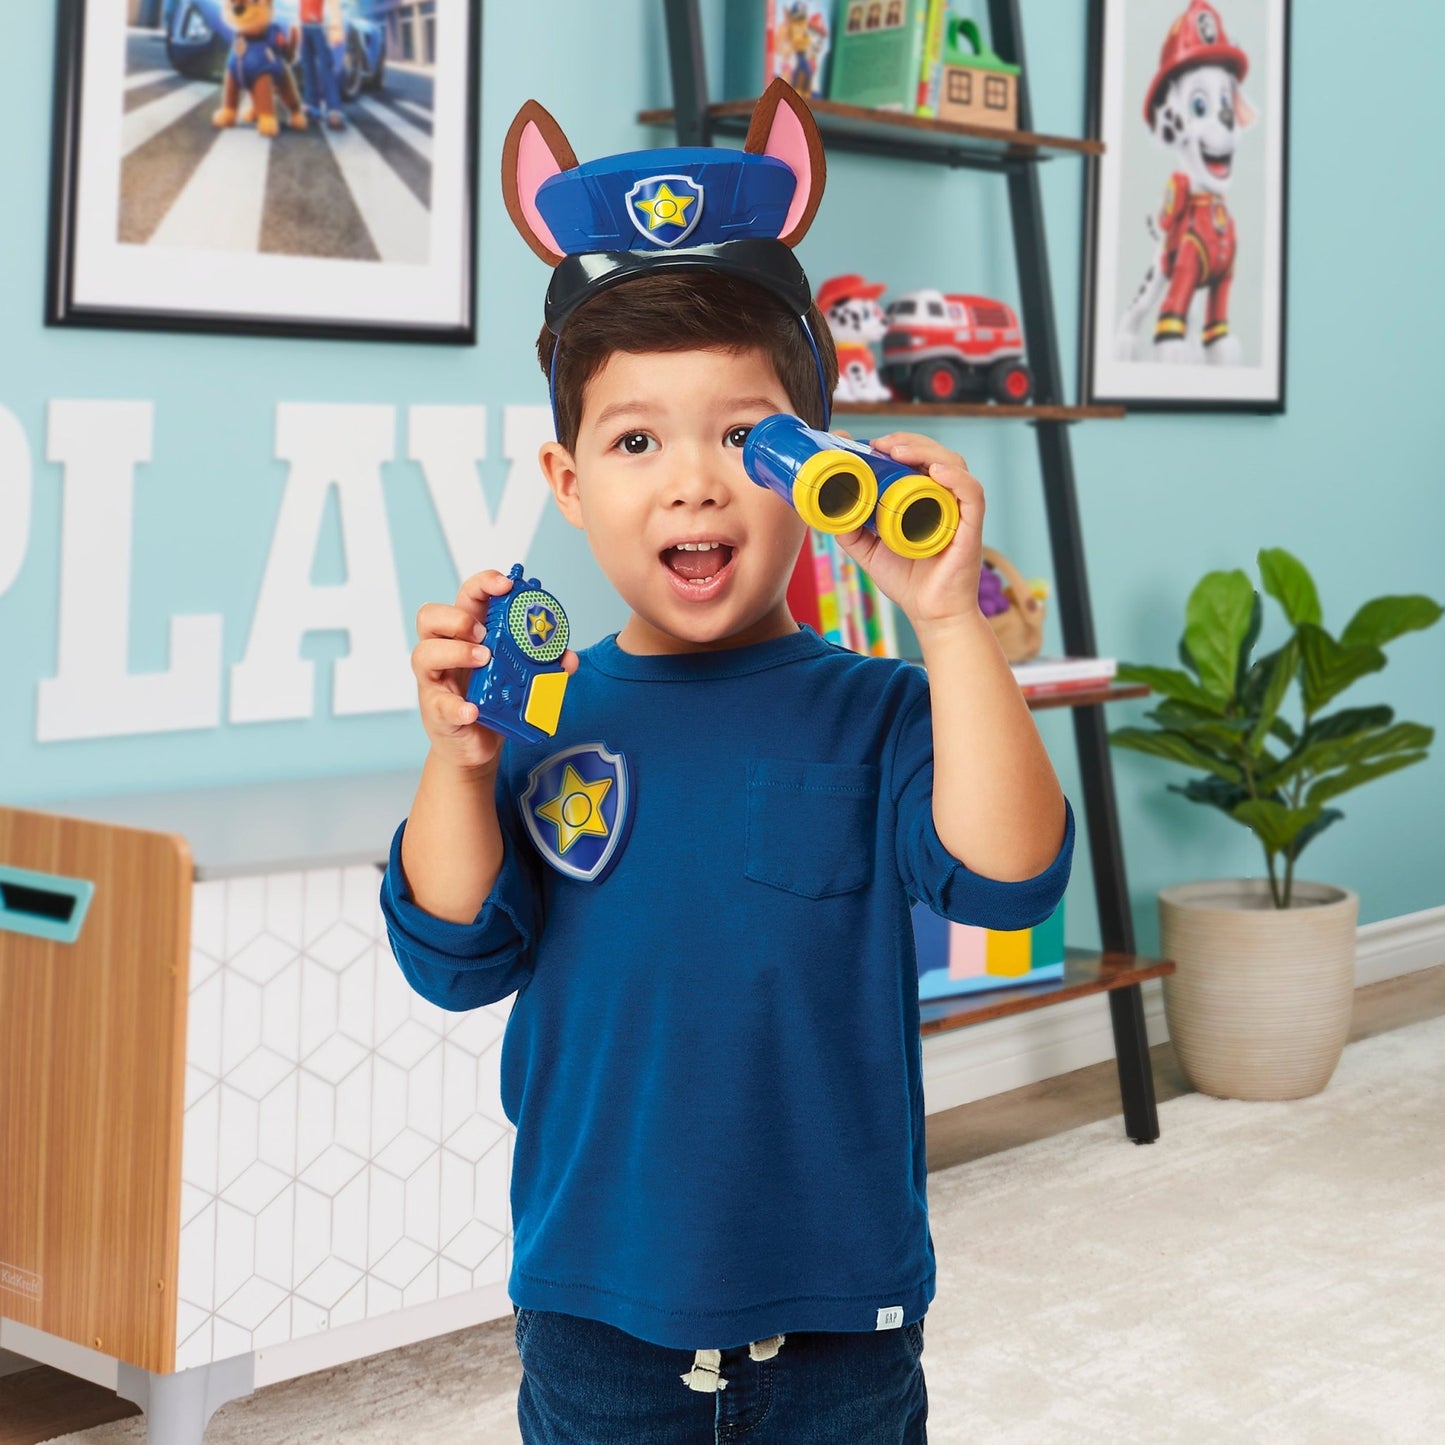 PAW Patrol, Chase Movie Rescue 8 - Piece Role Play Set for Pretend Play, Kids Toys for Ages 3 and up - Paramount Shop